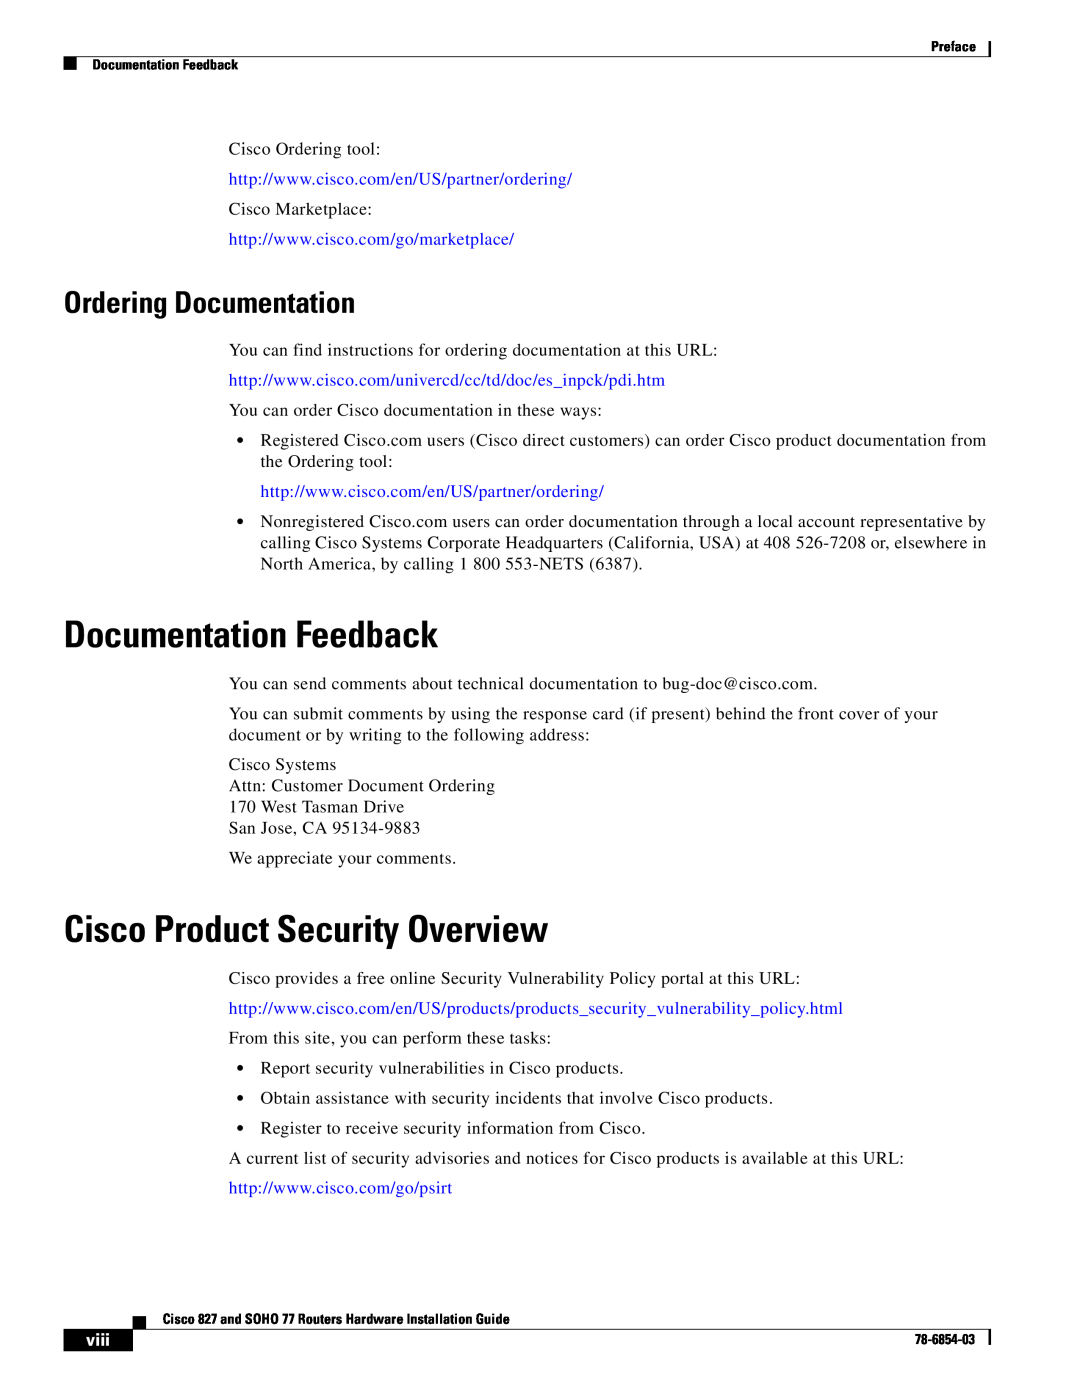 Cisco Systems SOHO 77 manual Documentation Feedback, Cisco Product Security Overview, Ordering Documentation, viii 